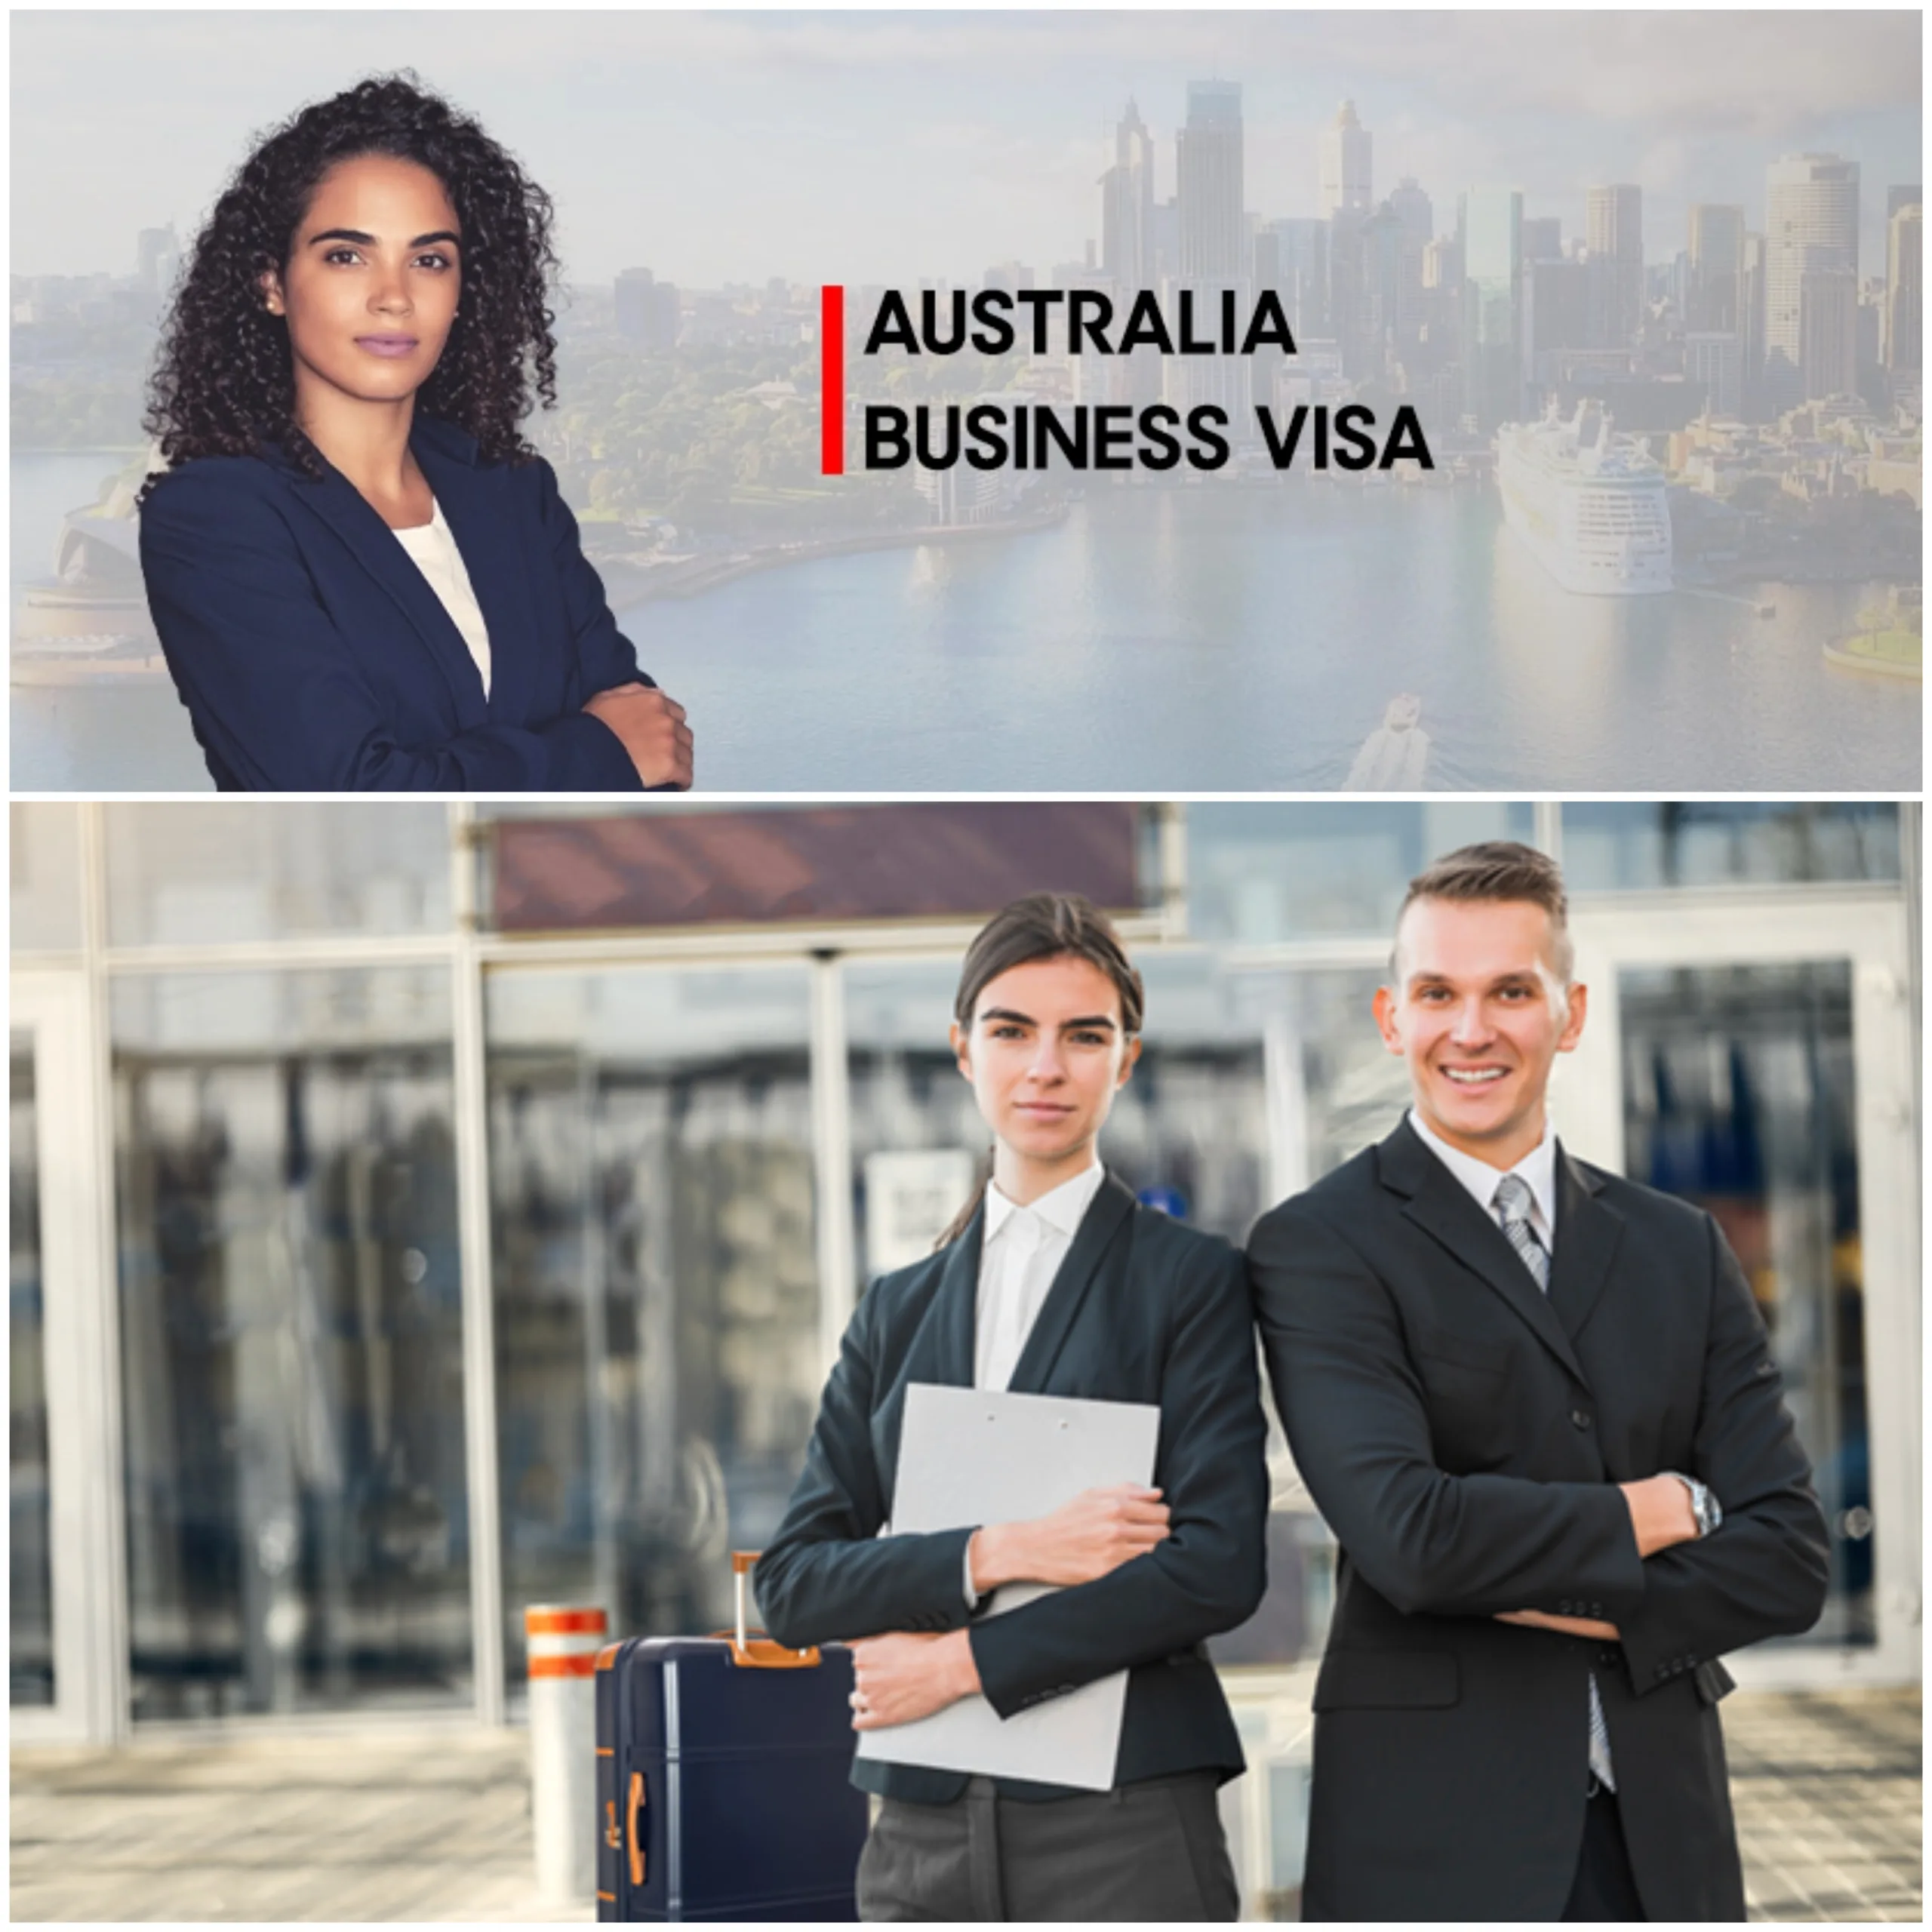 What is the Benefit of Business Visa in Australia